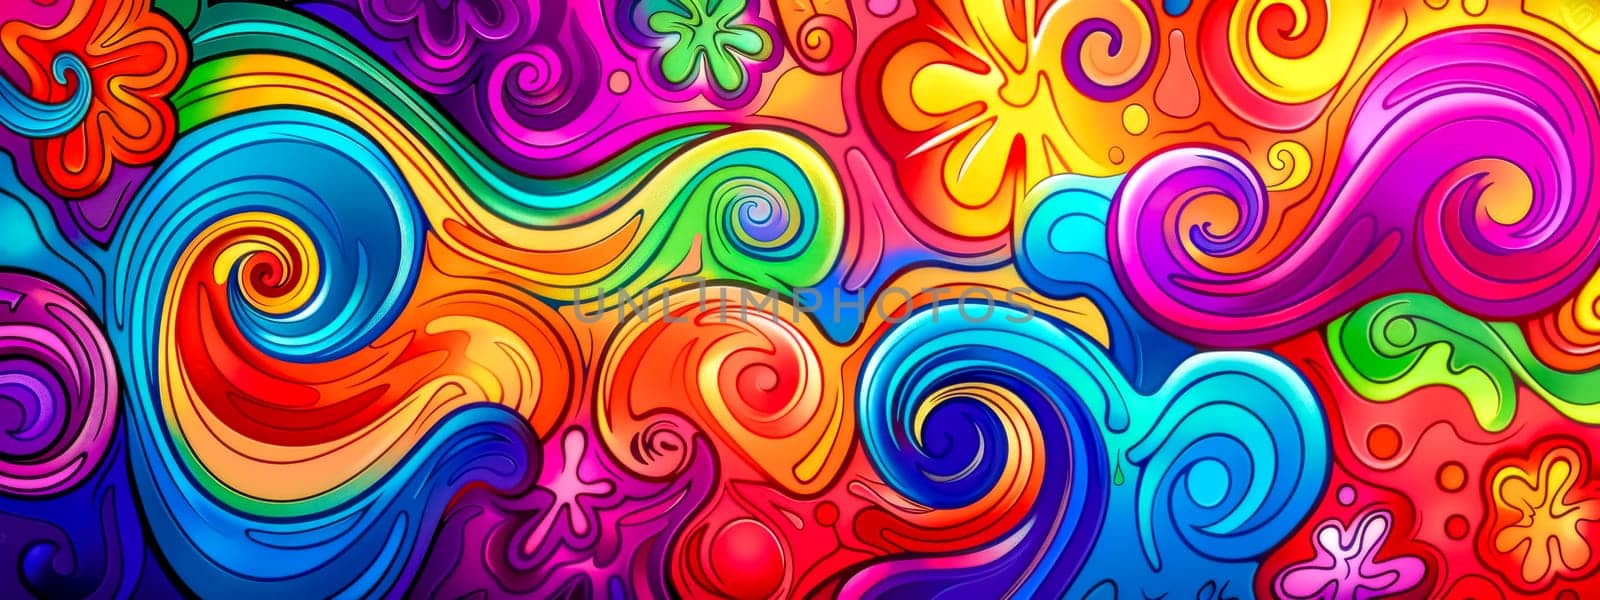 Vibrant multicolored abstract swirls and patterns for artistic backgrounds by Edophoto